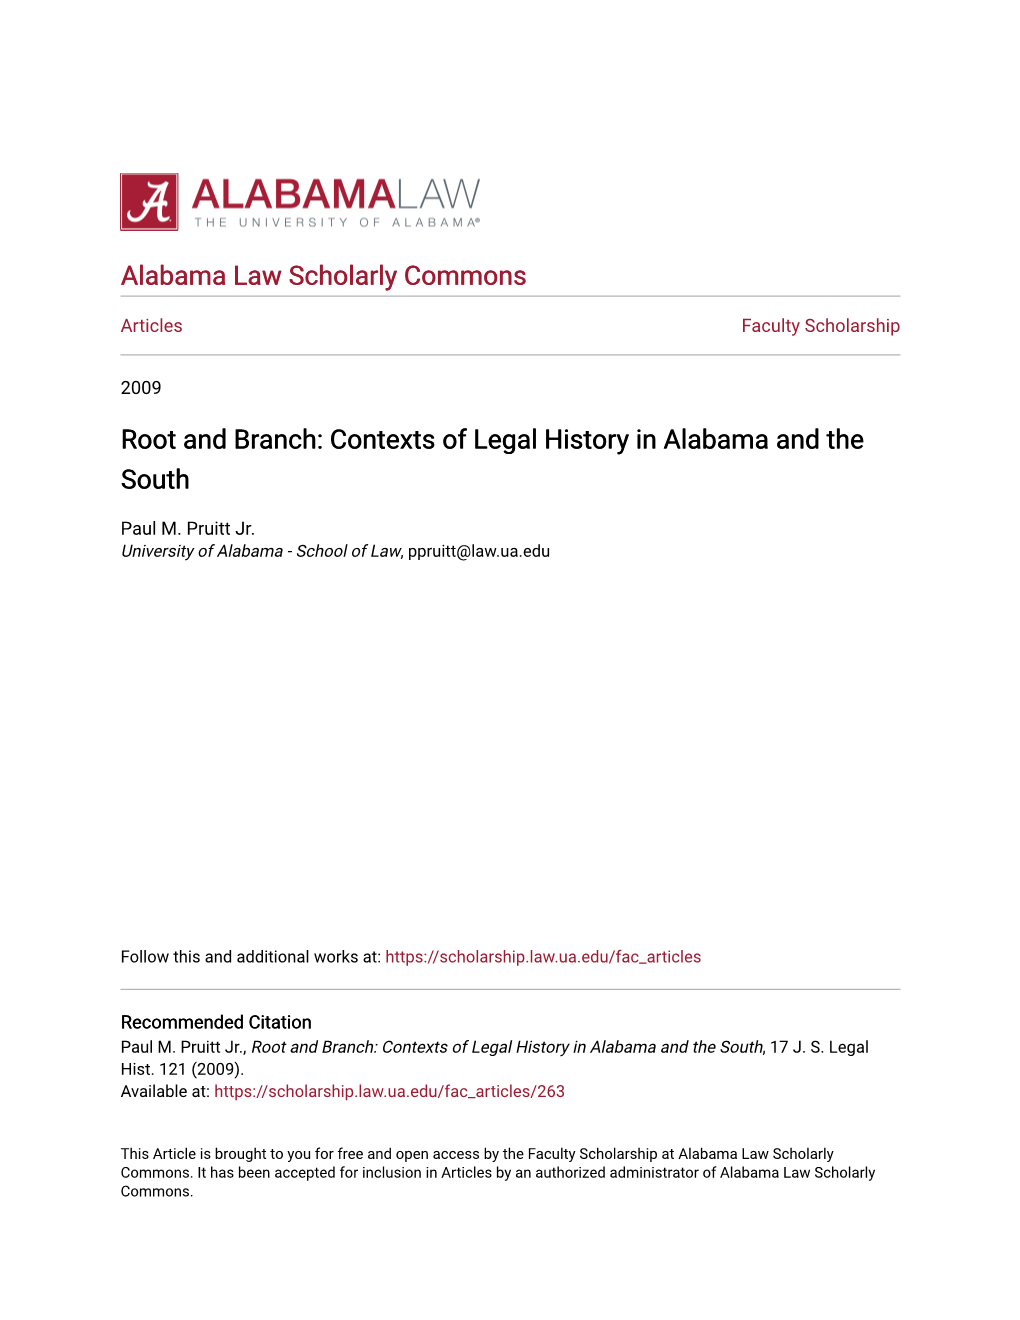 Root and Branch: Contexts of Legal History in Alabama and the South